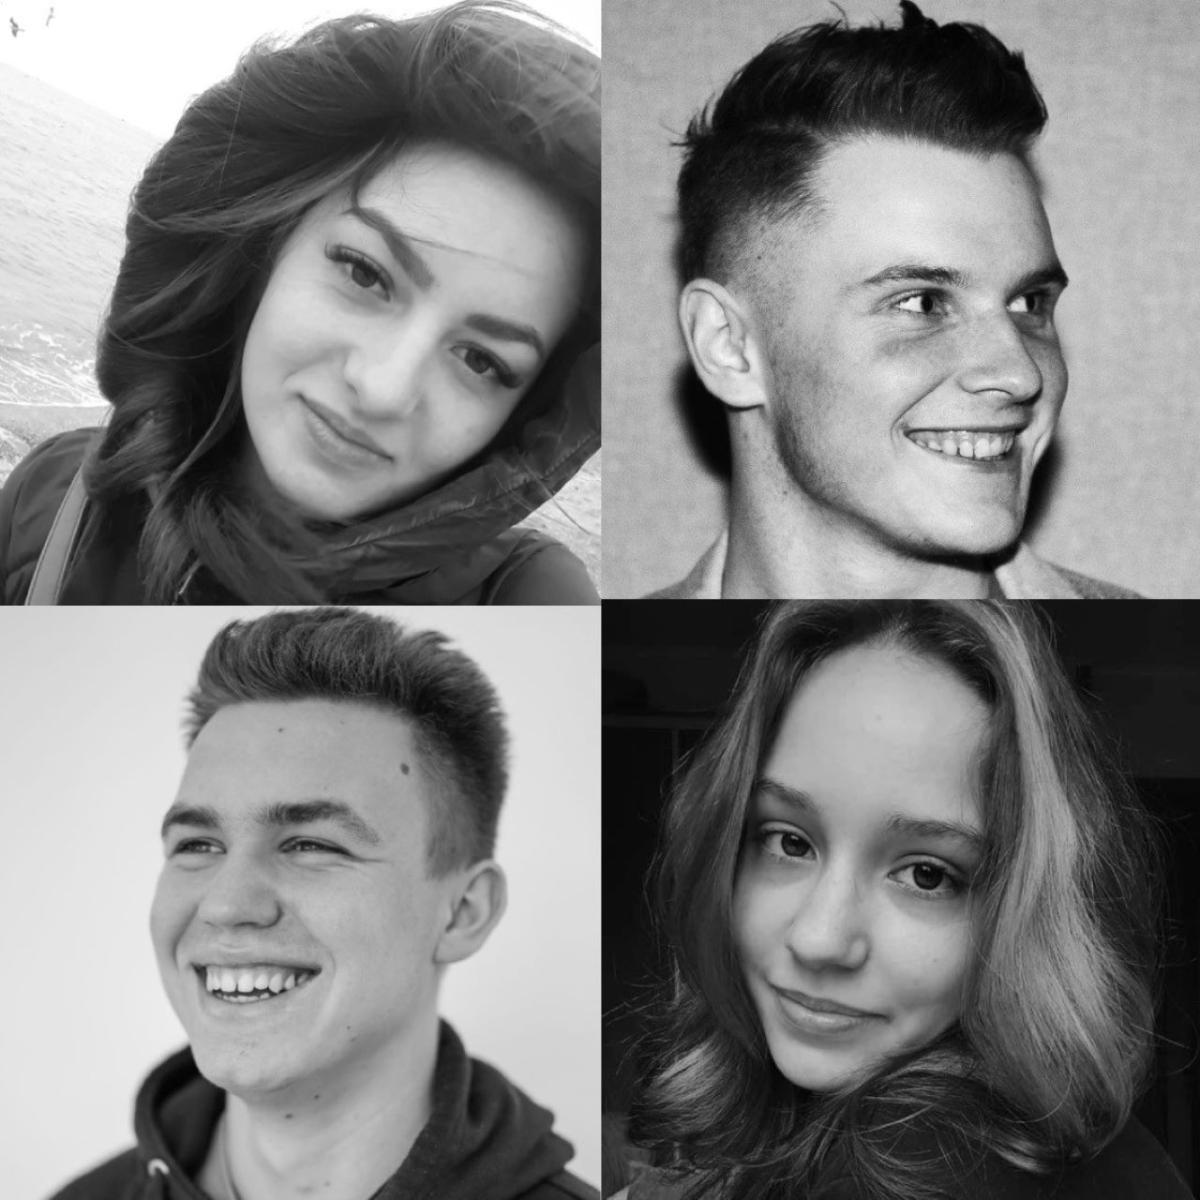 Photographs of four young Ukranian people who were killed in the war